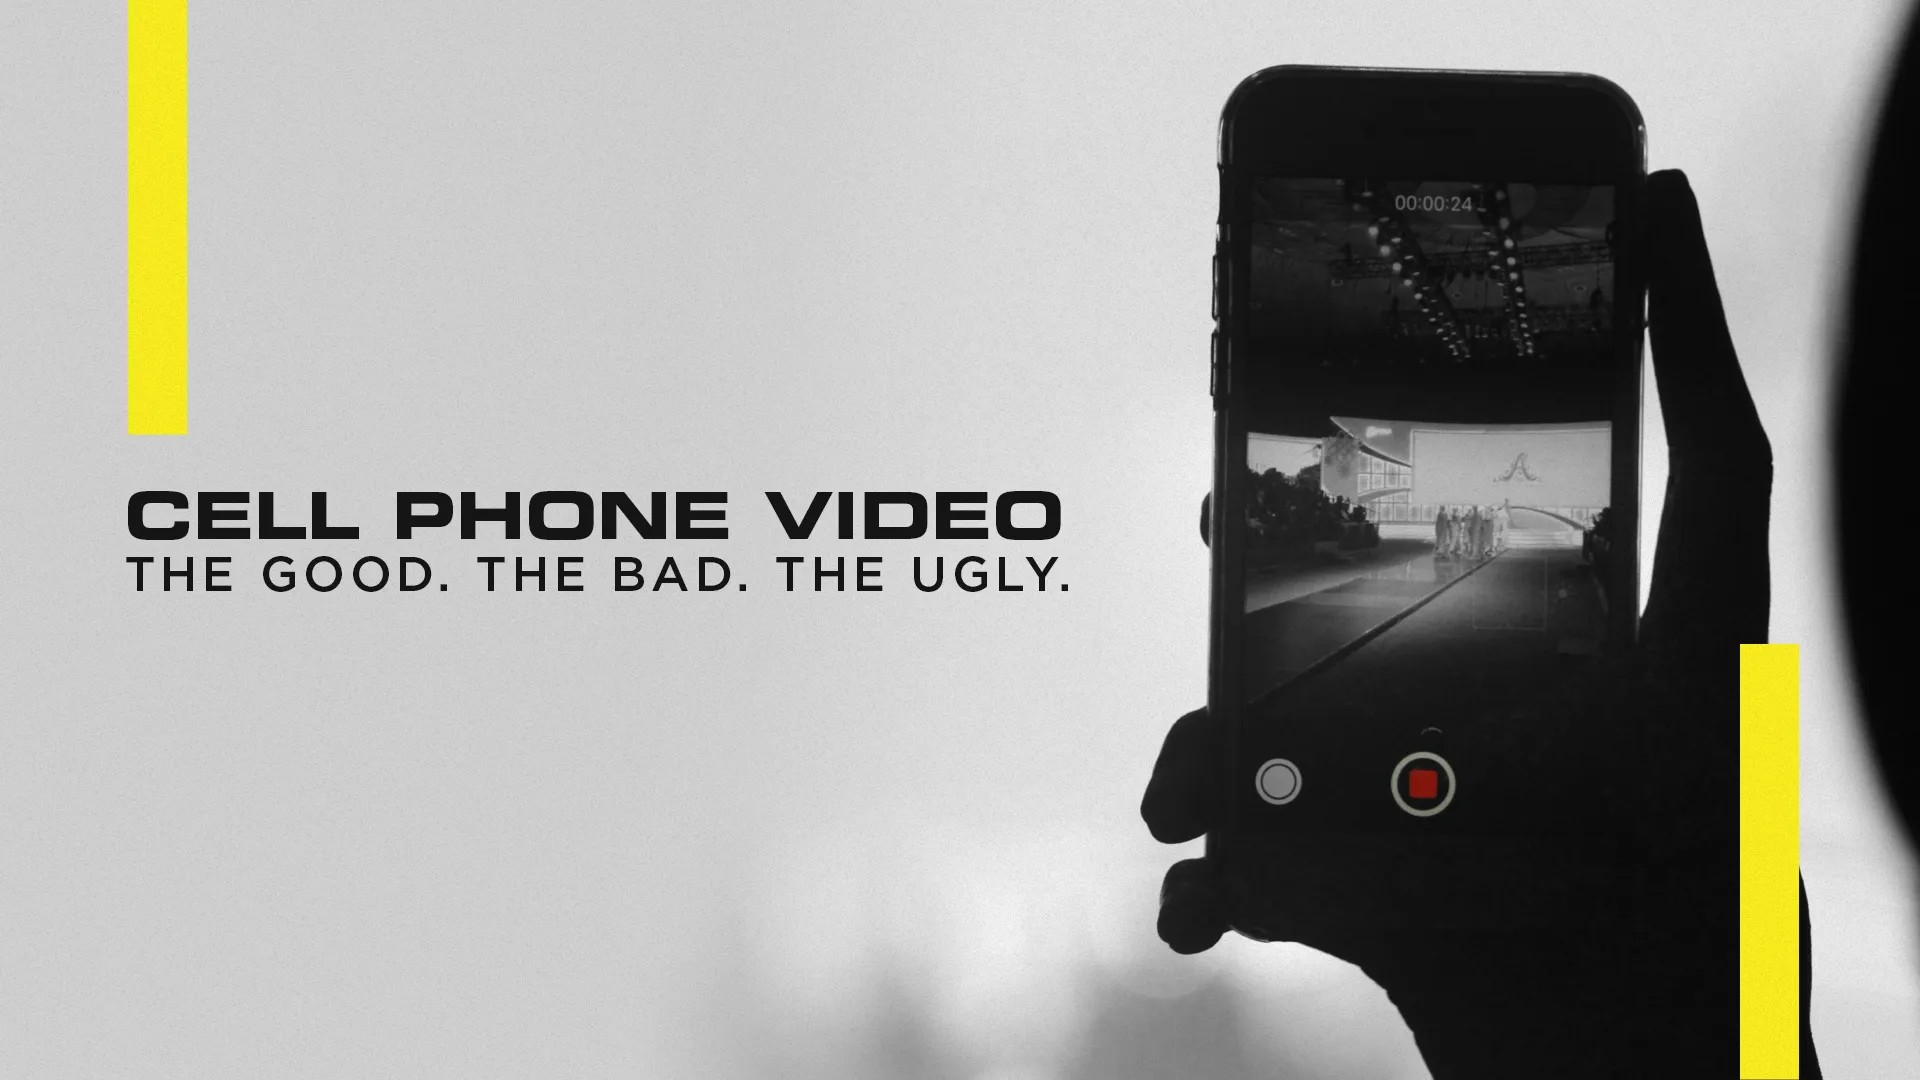 Cell Phone Video: The Good. The Bad. The Ugly.